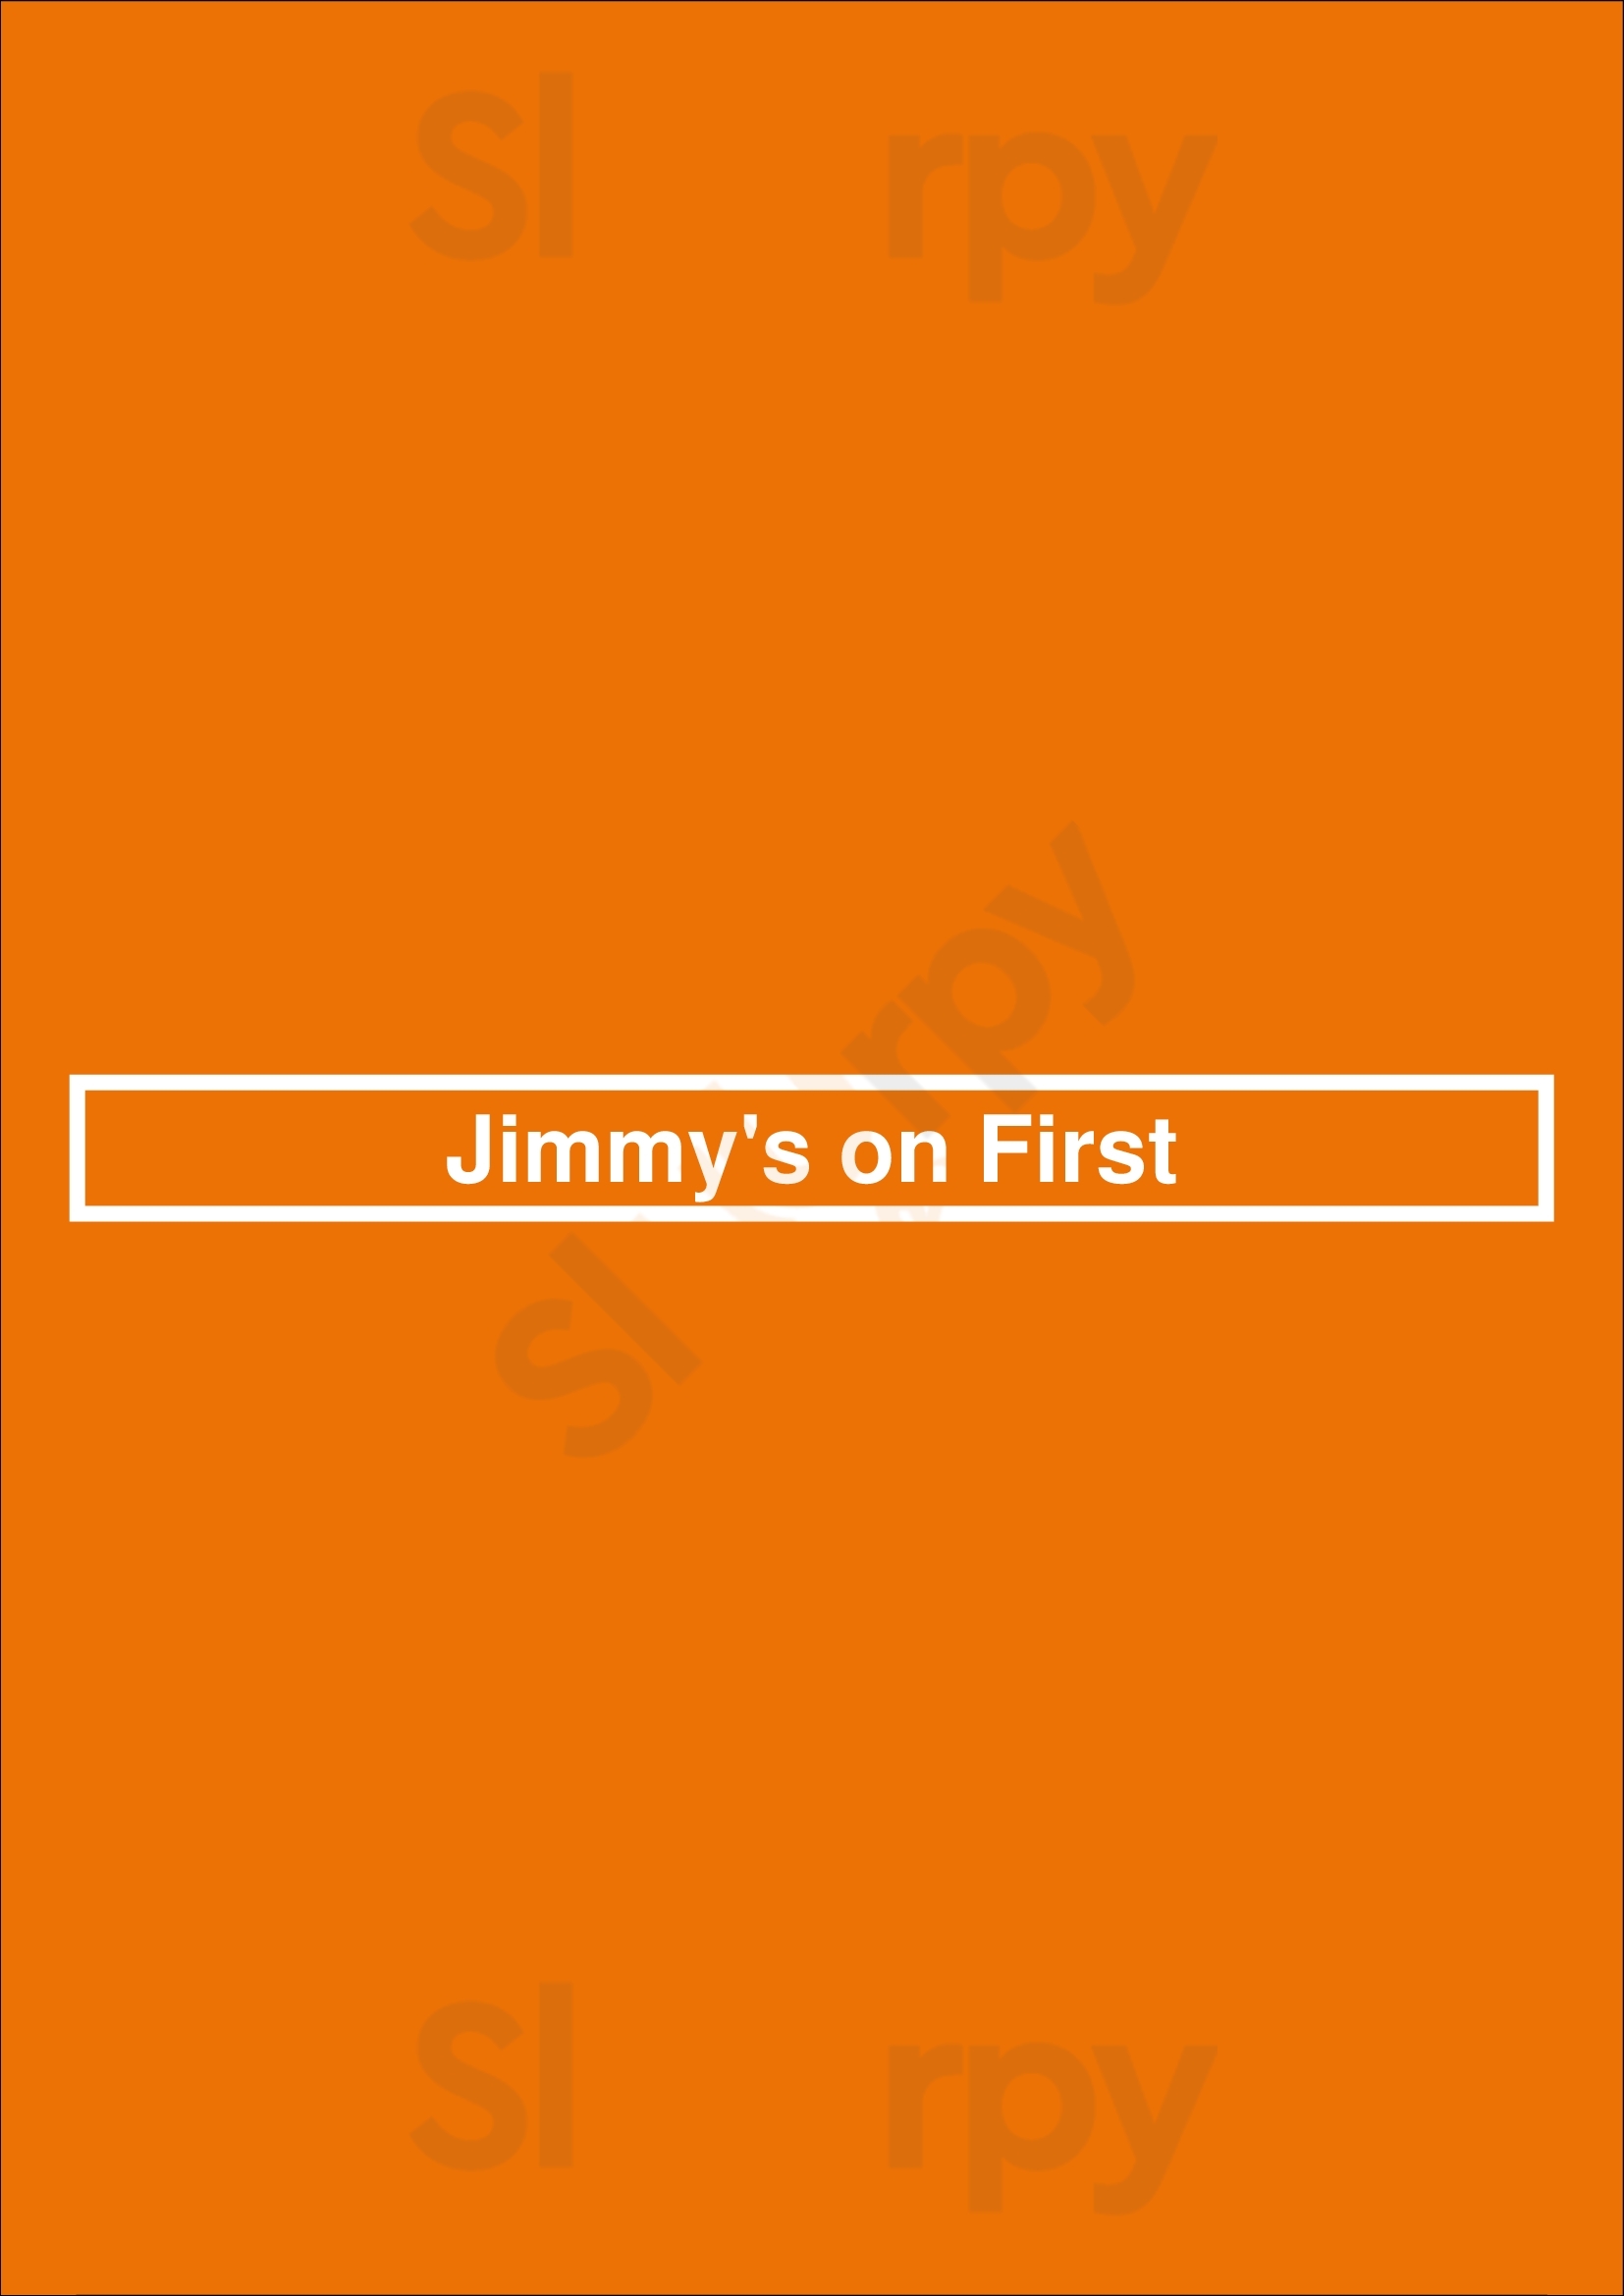 Jimmy's On First Seattle Menu - 1